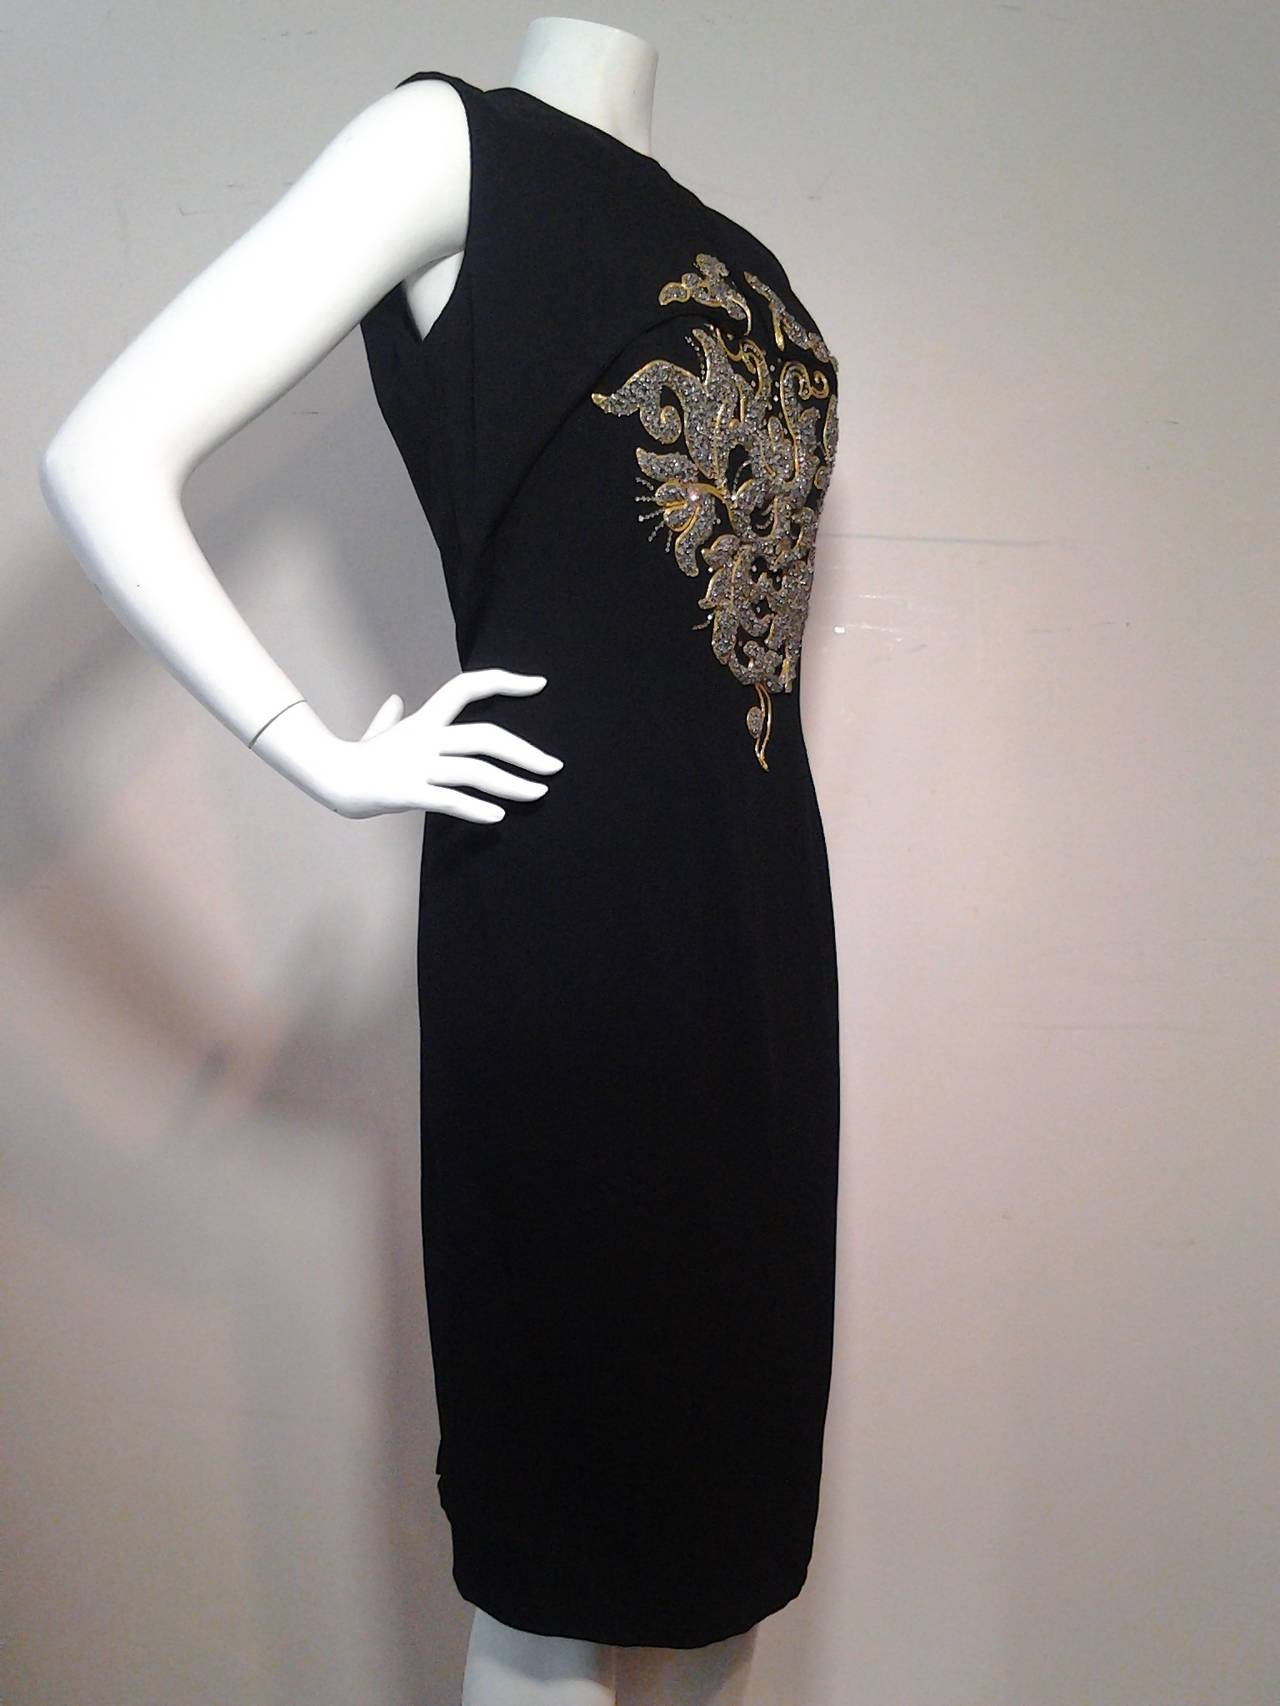 A fantastic 1950s Mr. Blackwell 2-piece cocktail dress and vest.  Black silk crepe spaghetti strap sheath with an incredible and finely wrought beaded and embroidered crest in metallics: gold and silver.  To top it off is a small bolero vest with